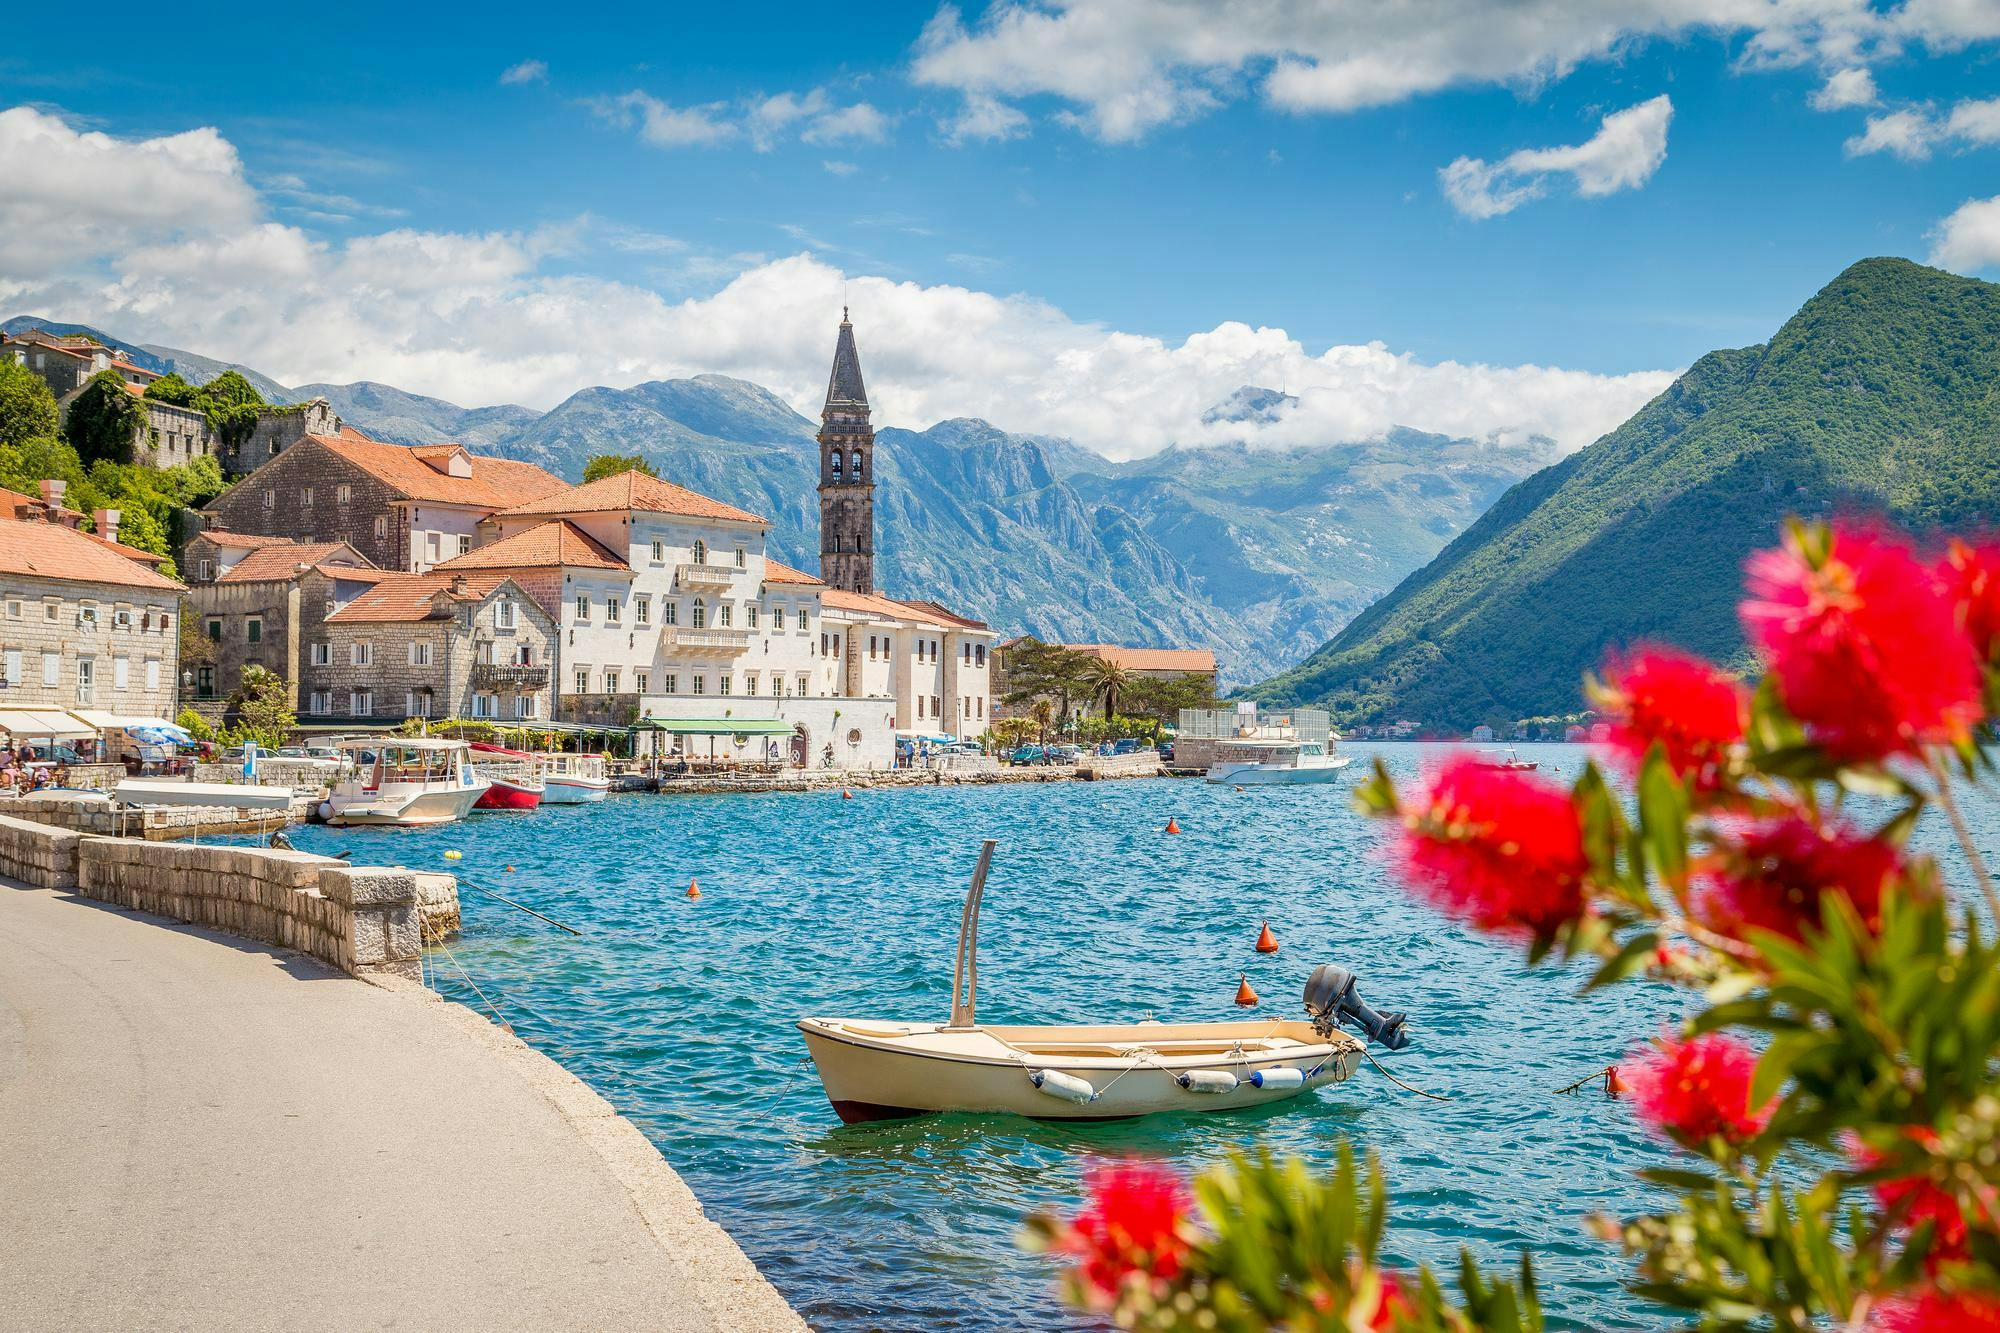 Scenic panorama view of the historic town of Perast at famous Bay of Kotor with blooming flowers on a beautiful sunny day with blue sky and clouds in summer, Montenegro, southern Europe

Shutterstock